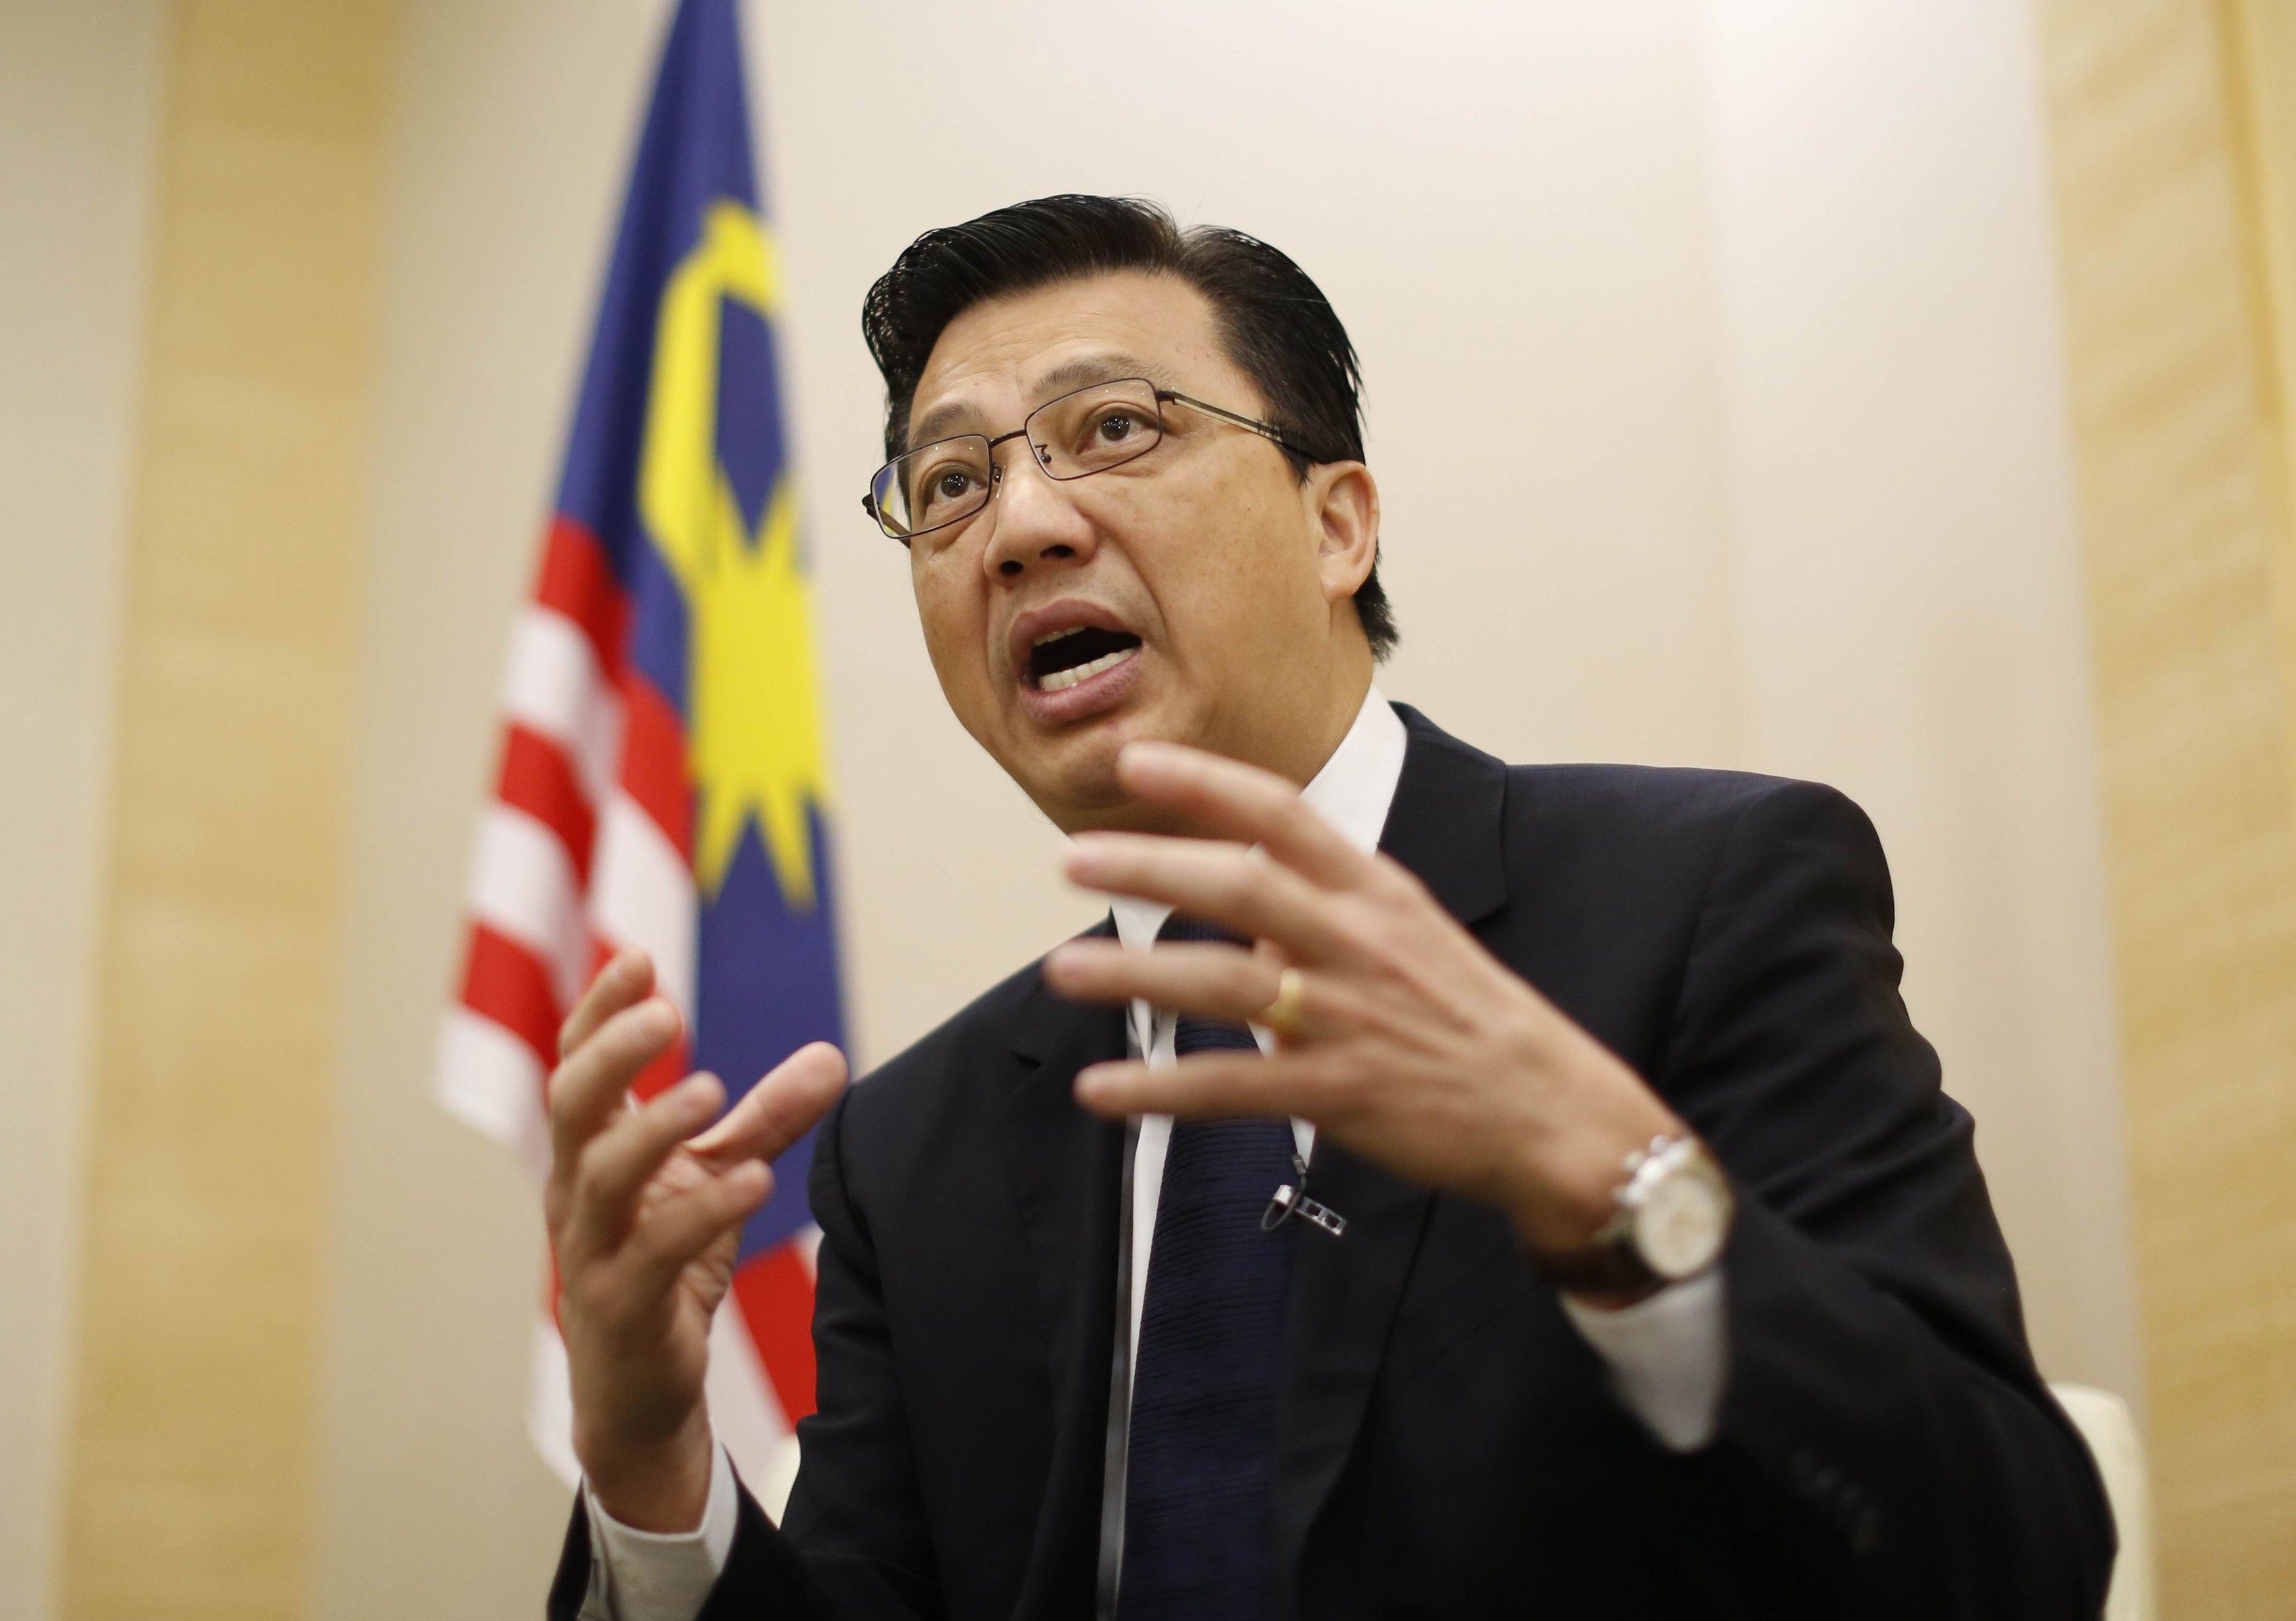 Datuk Sri Liow Tiong Lai gestures during an interview with Reuters ahead of the one-year anniversary of the disappearance of Malaysia Airlines flight MH370, in Putrajaya, March 6, 2015. u00e2u20acu201d Reuters picn